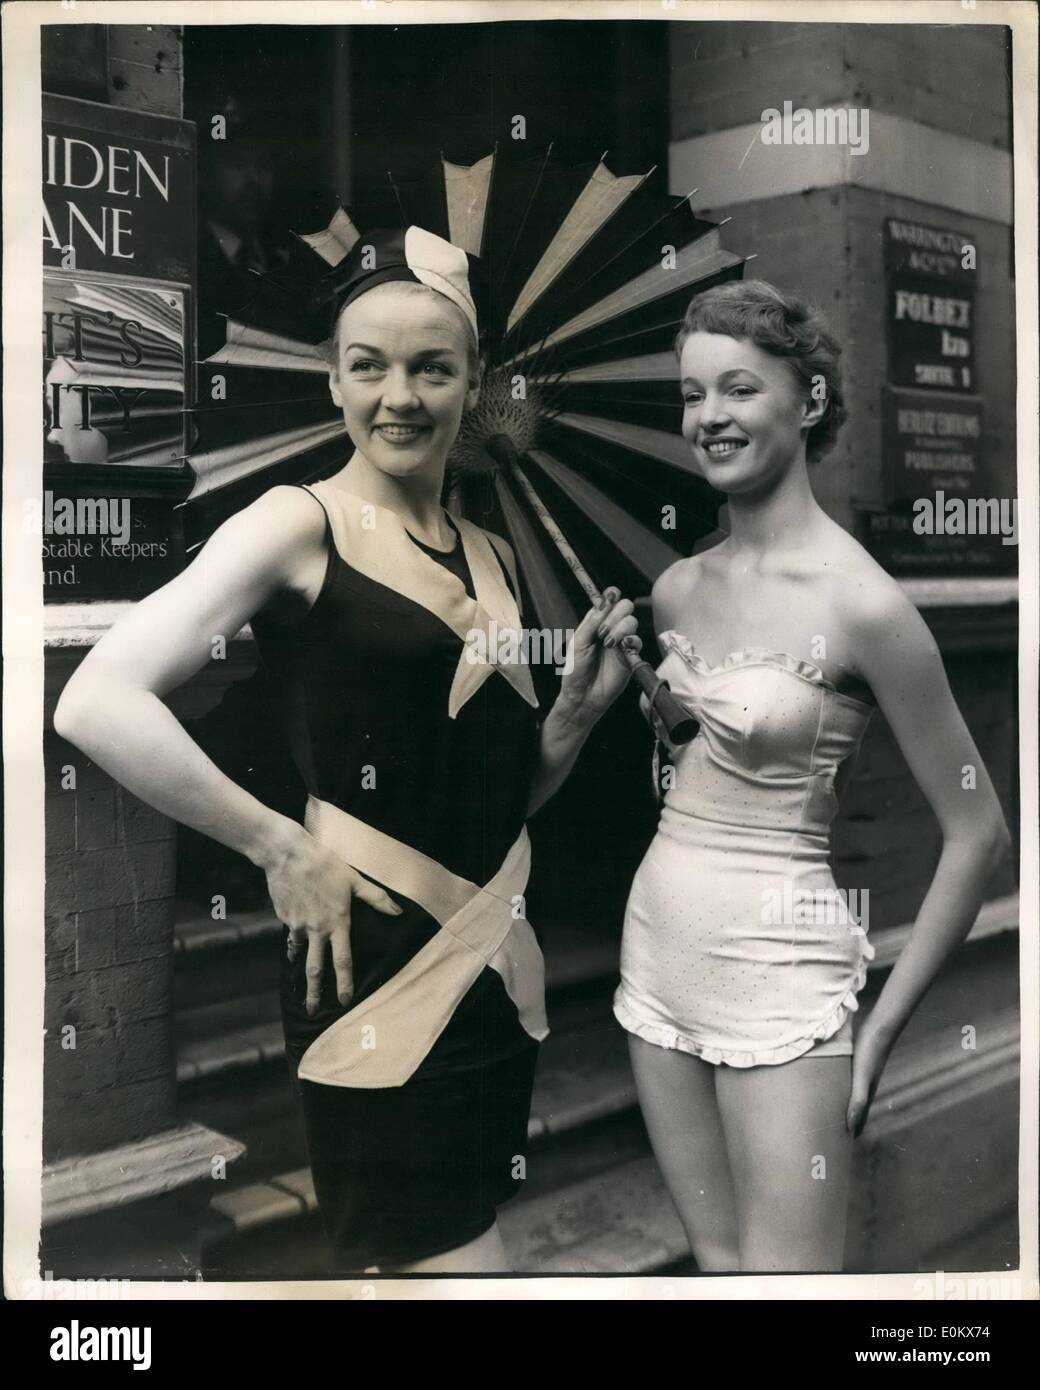 Apr. 04, 1952 - Contrast in Sports Styles. 1952 wSim Suit And the 1927 model.: Many new styles were to be seen - contrasted with their old-time equivalents - in the Teddy Tinling - M.G.M. dress Show-held at Rule's Maiden Lane, this afternoon. Photo shows Jill Howard wears an Ivory satin Lastex brocade swimsuit, with a strapless boned bra top and frilled apron skirt - while Elizabeth Chantler wears it 1927 equivalent at the show this afternoon. Stock Photo